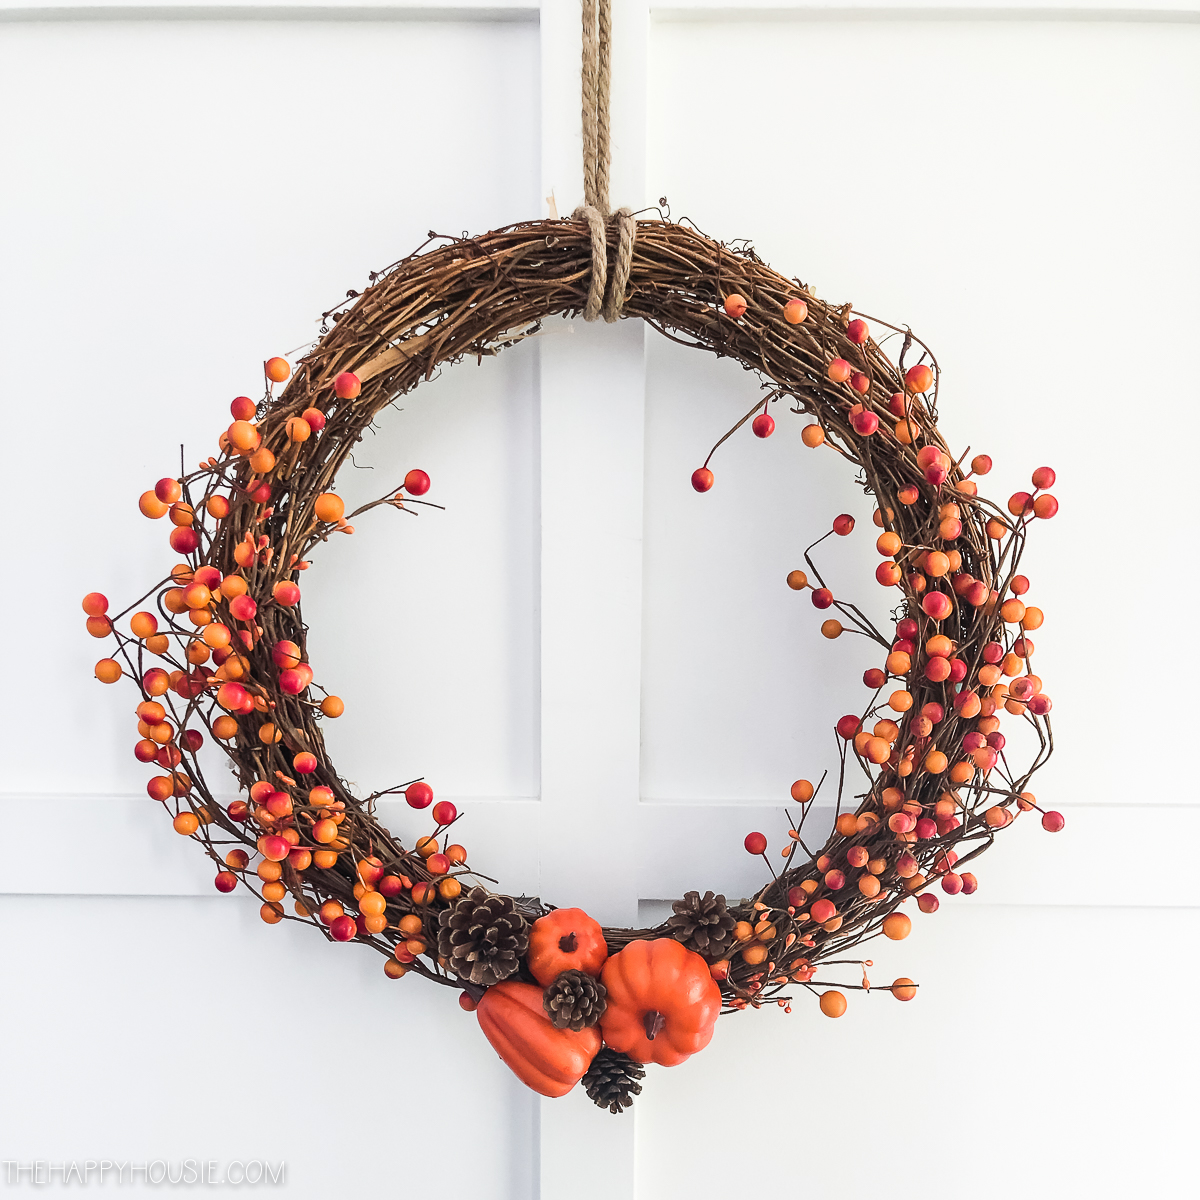 Sisal twine attached to the wreath to hang it.